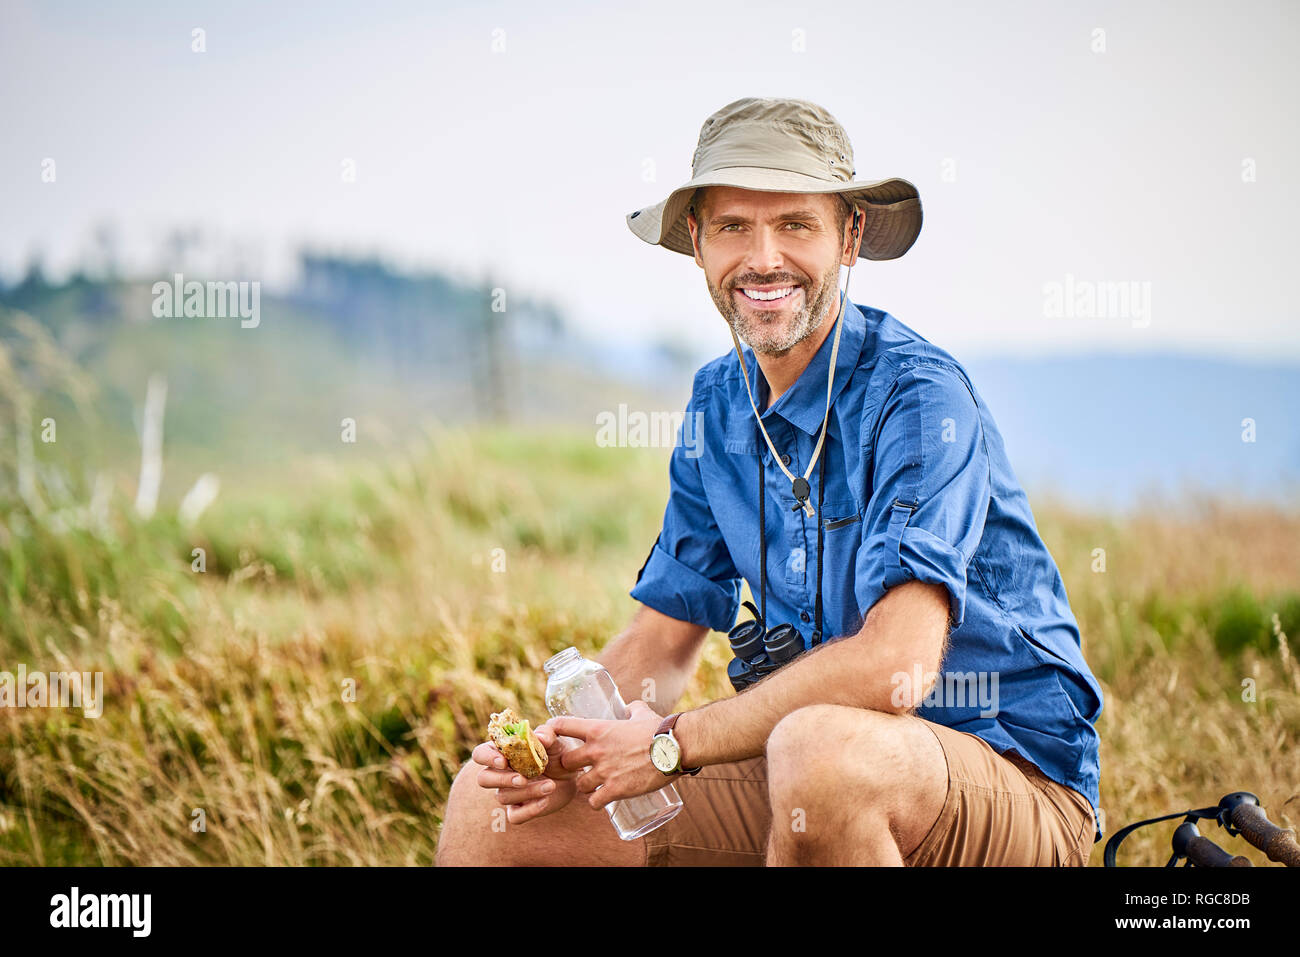 Portrait of smiling man resting and eating sandwich during hiking trip Stock Photo